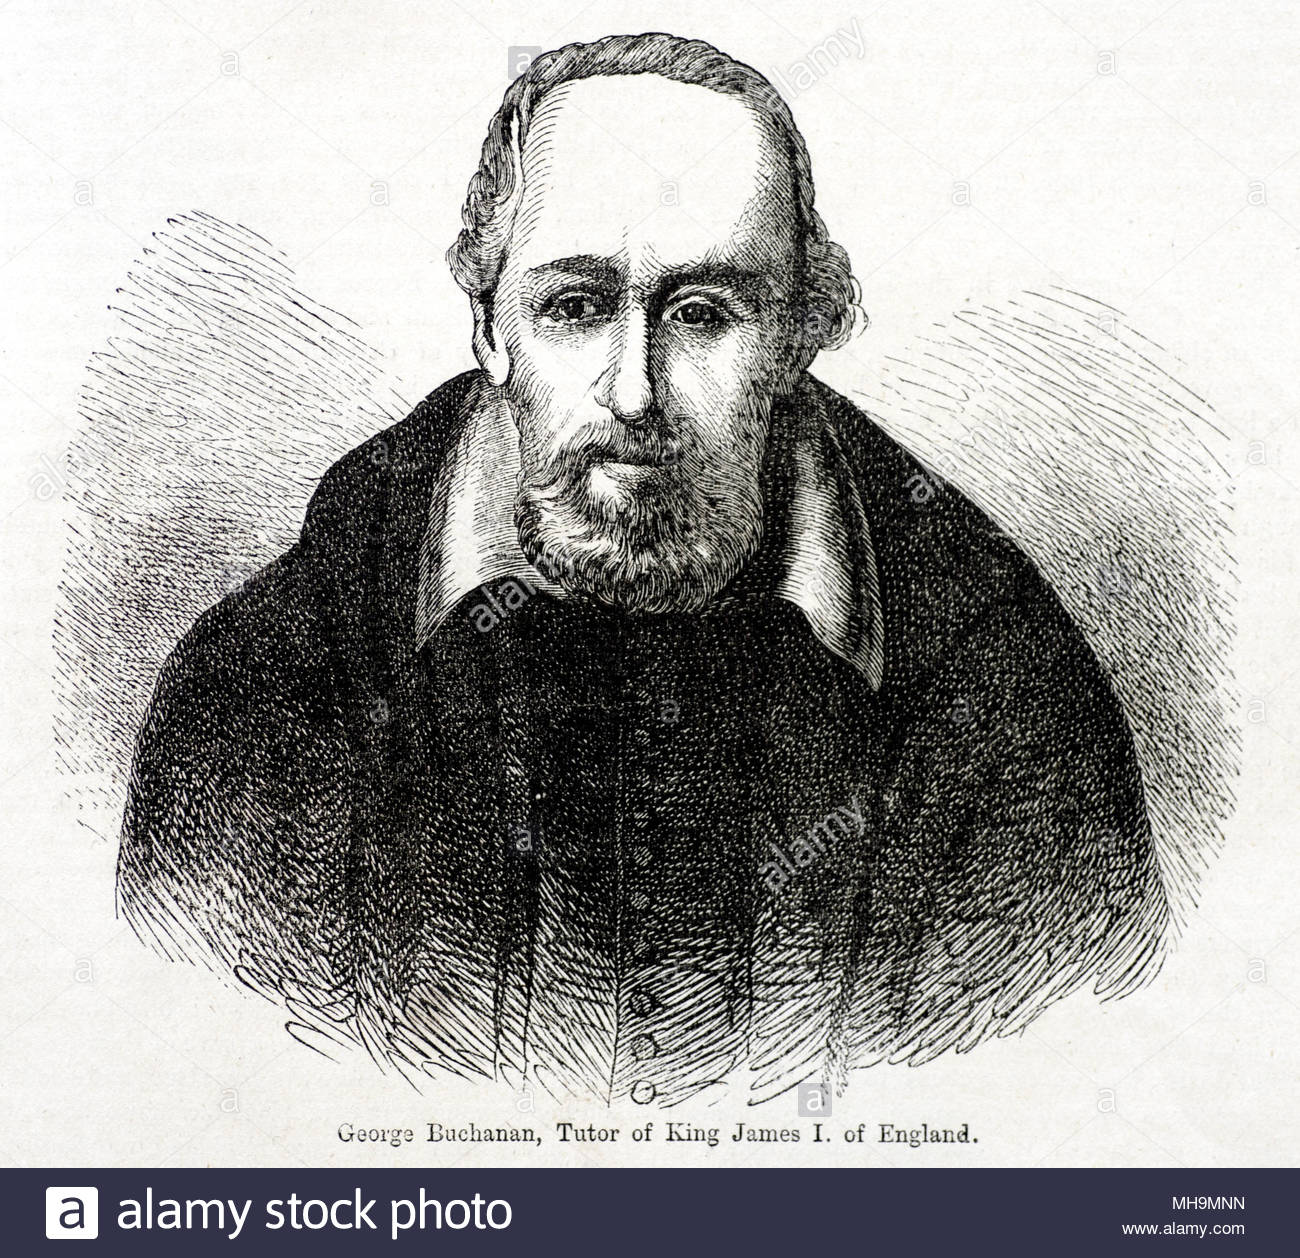 George Buchanan, Tutor of King James I of England was a Scottish historian and humanist scholar 1506 – 1582, antique illustration from circa 1880 Stock Photo